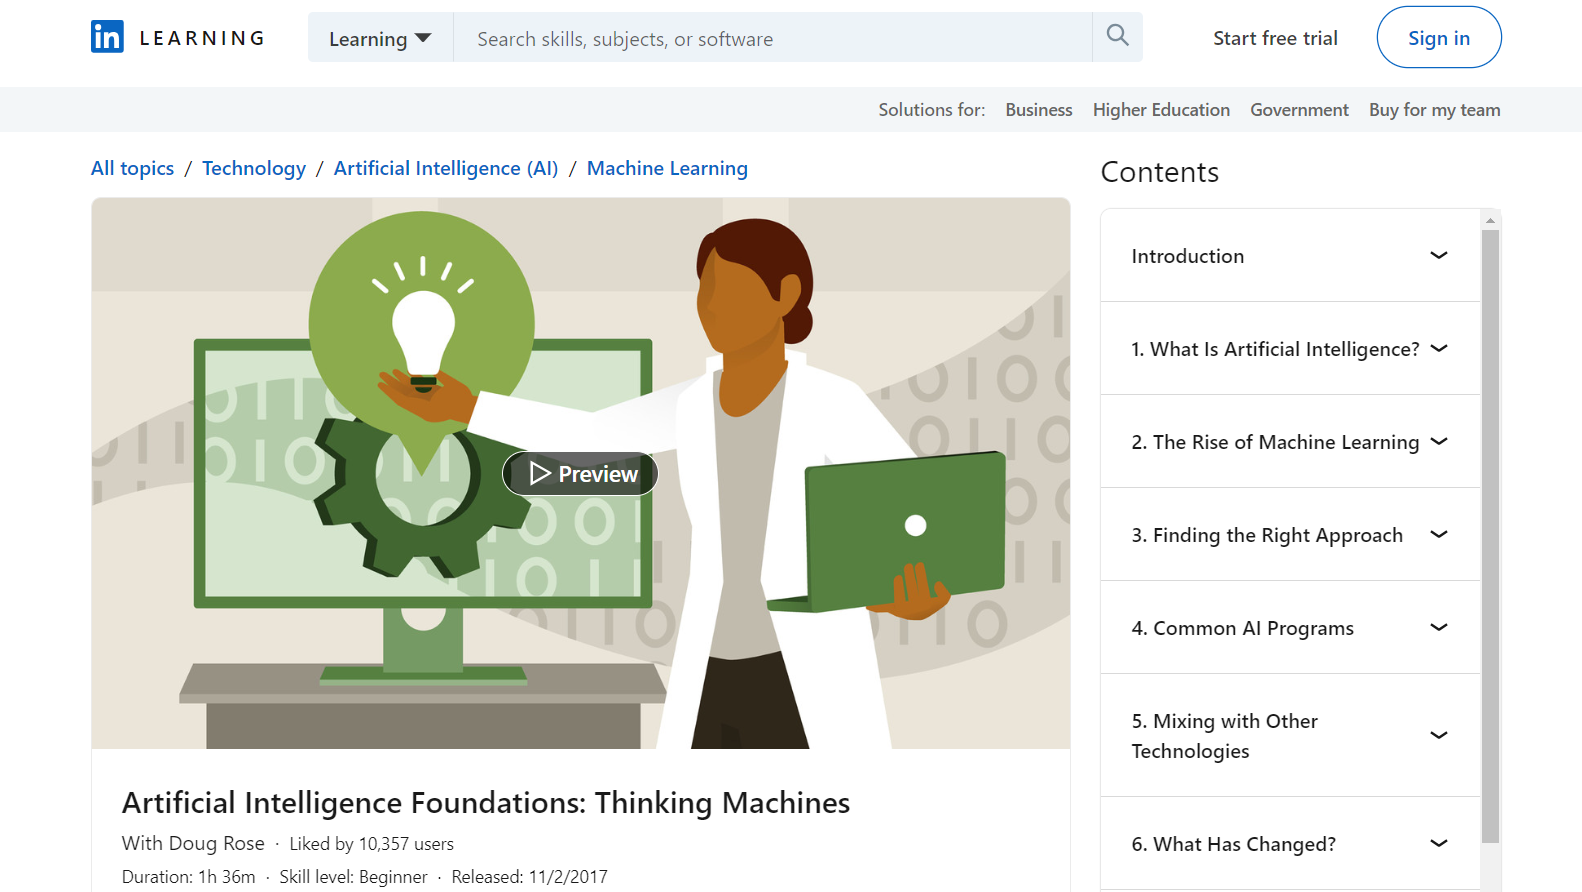 LinkedIn Learning - Artificial Intelligence Foundations: Thinking Machines